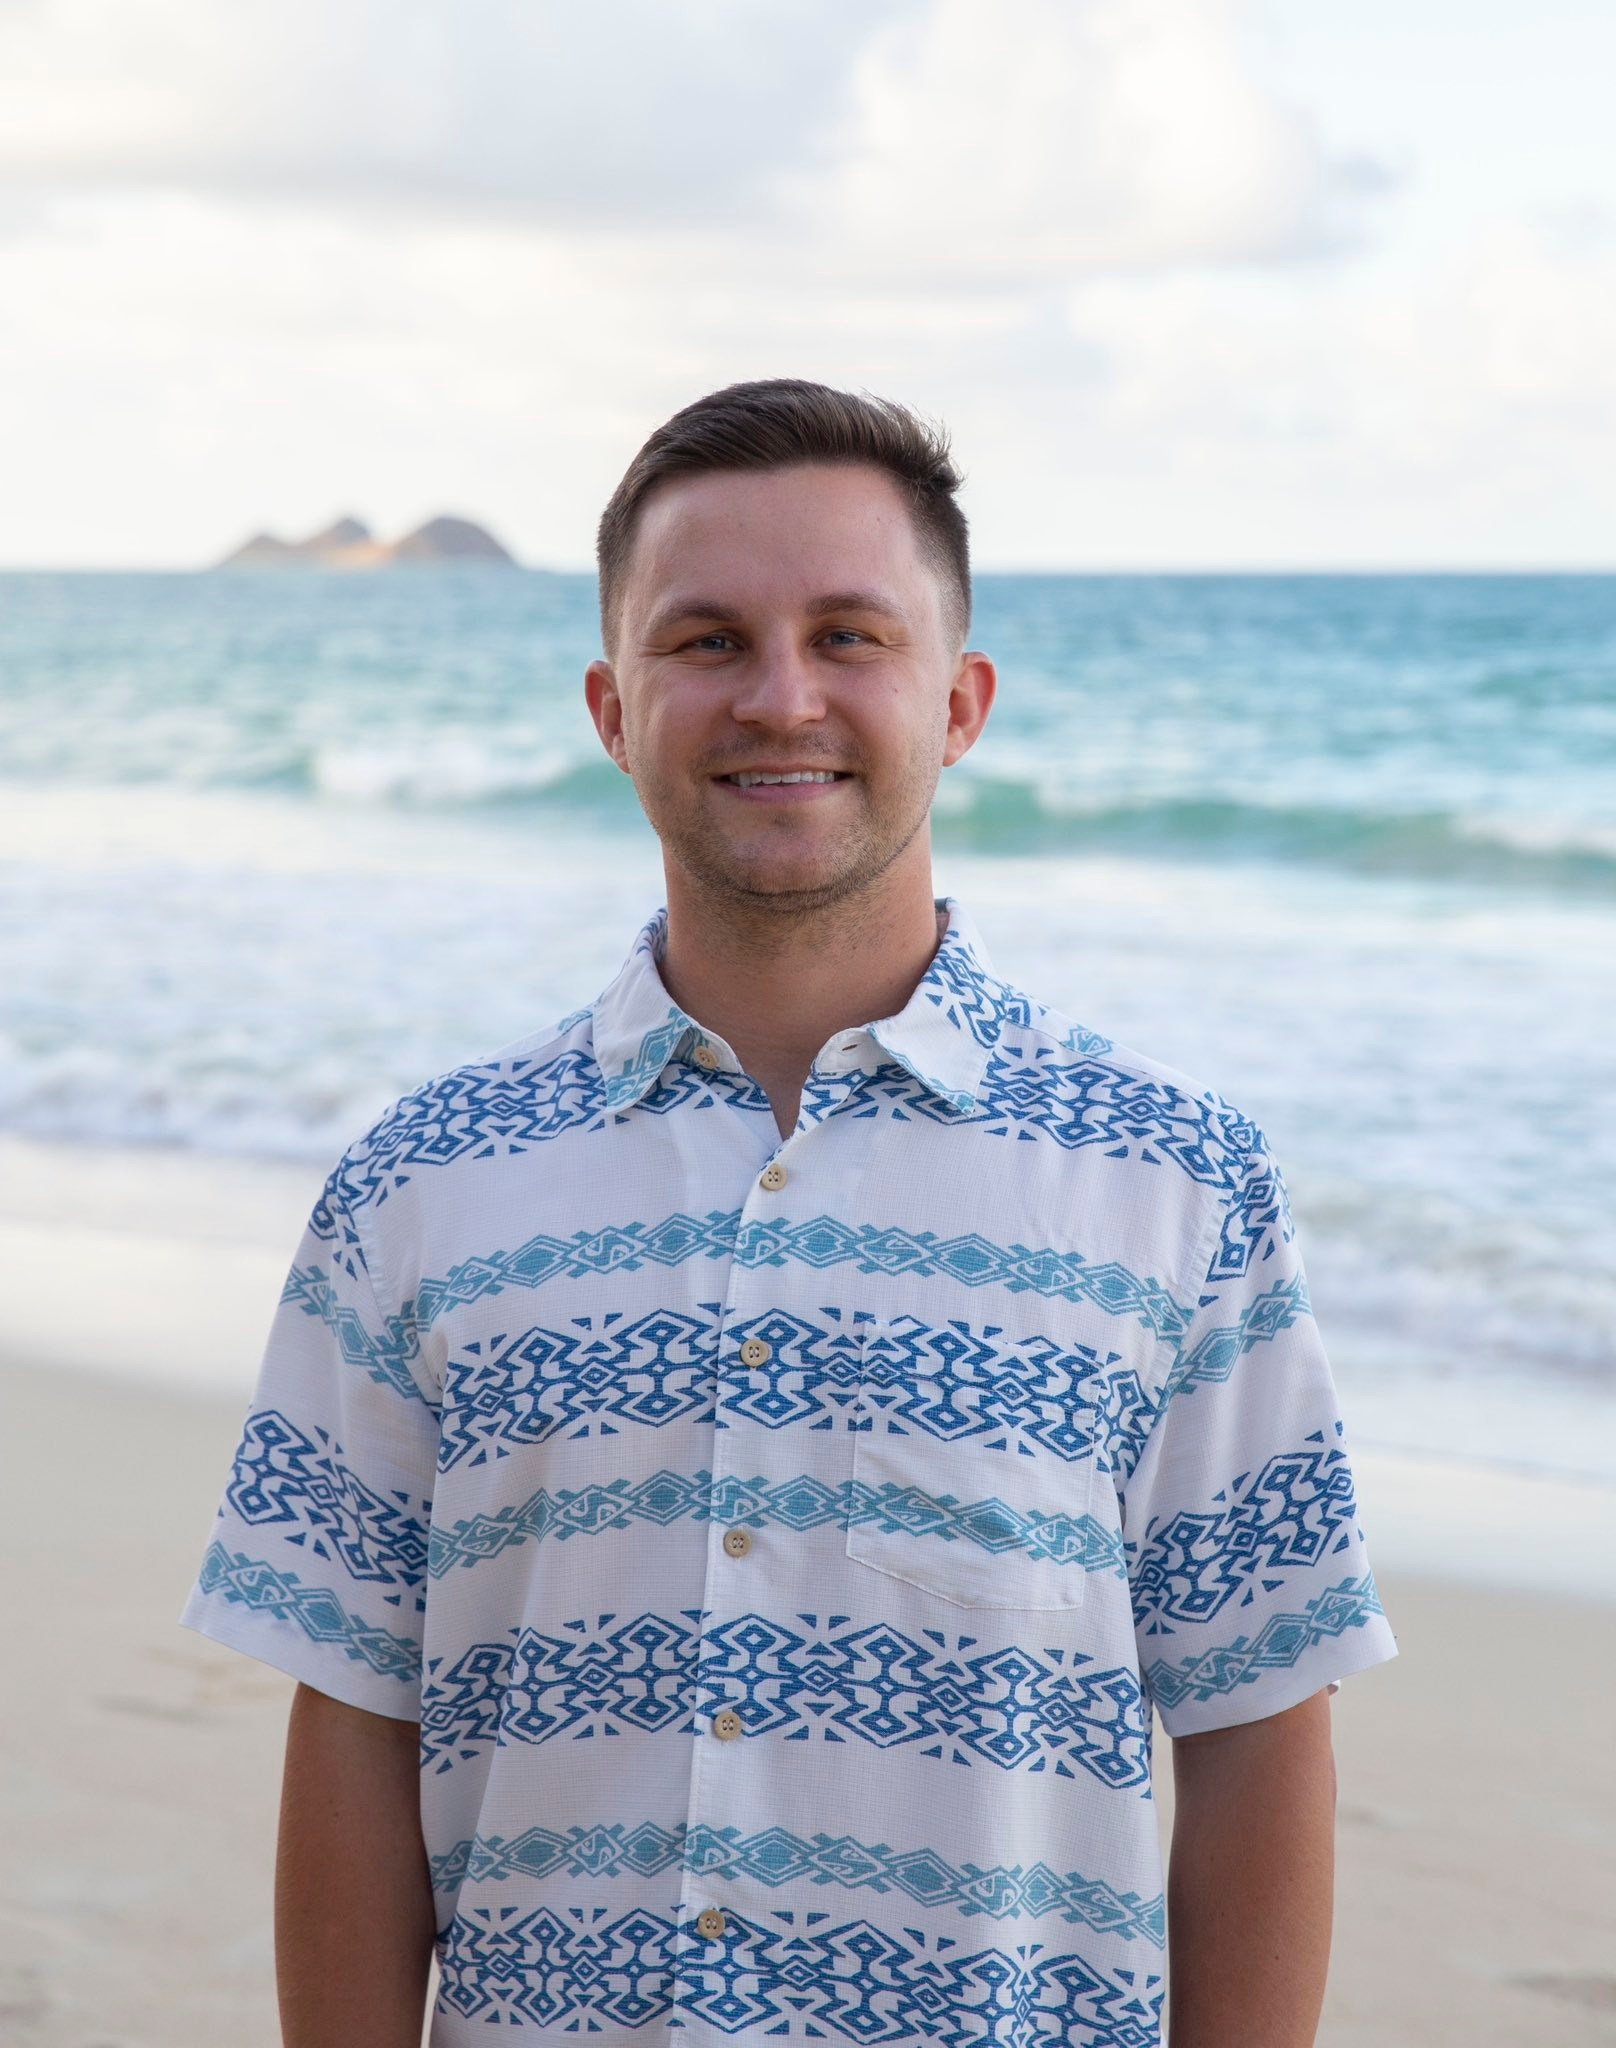 Photo of a man in an aloha shirt at the beach, smiling